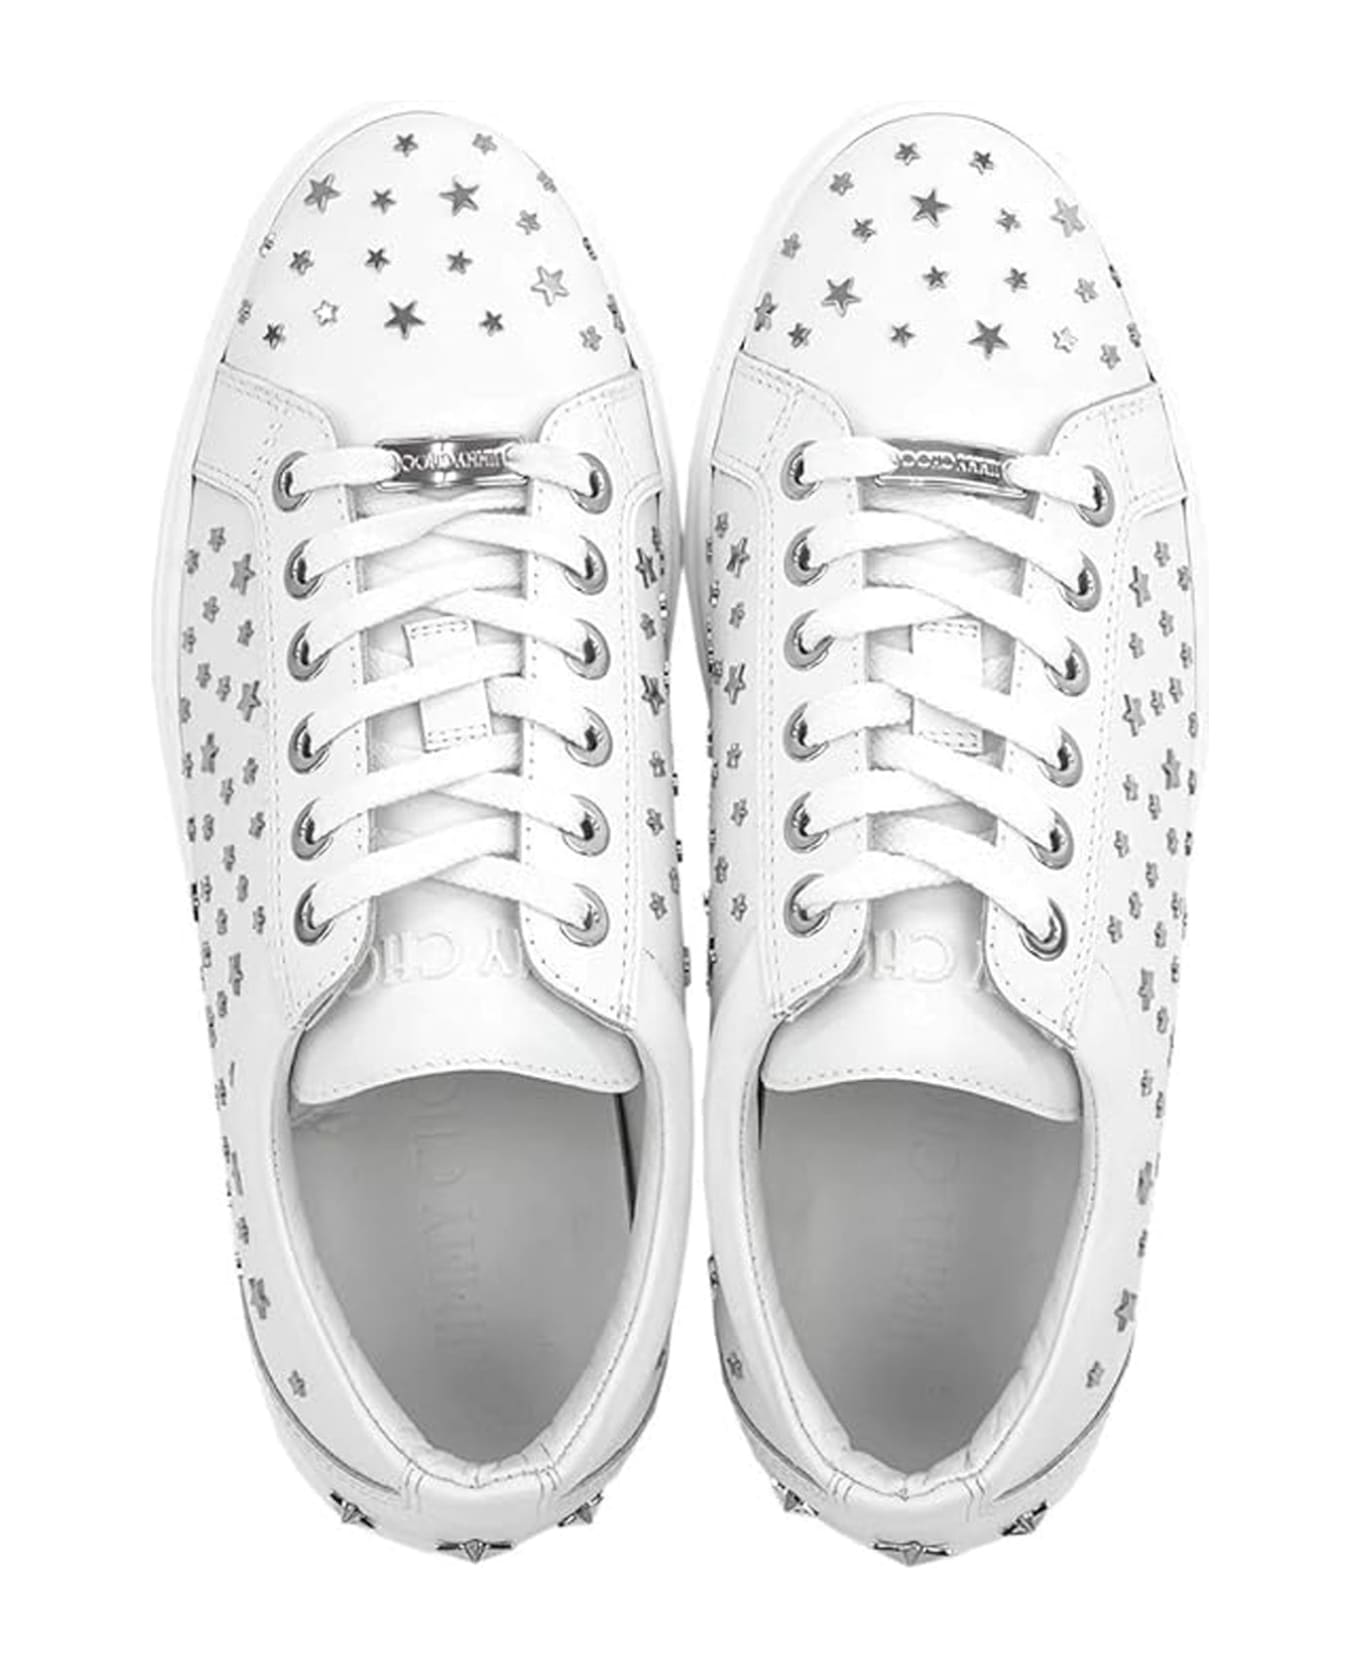 Jimmy Choo Cash Star Leather Sneakers - White